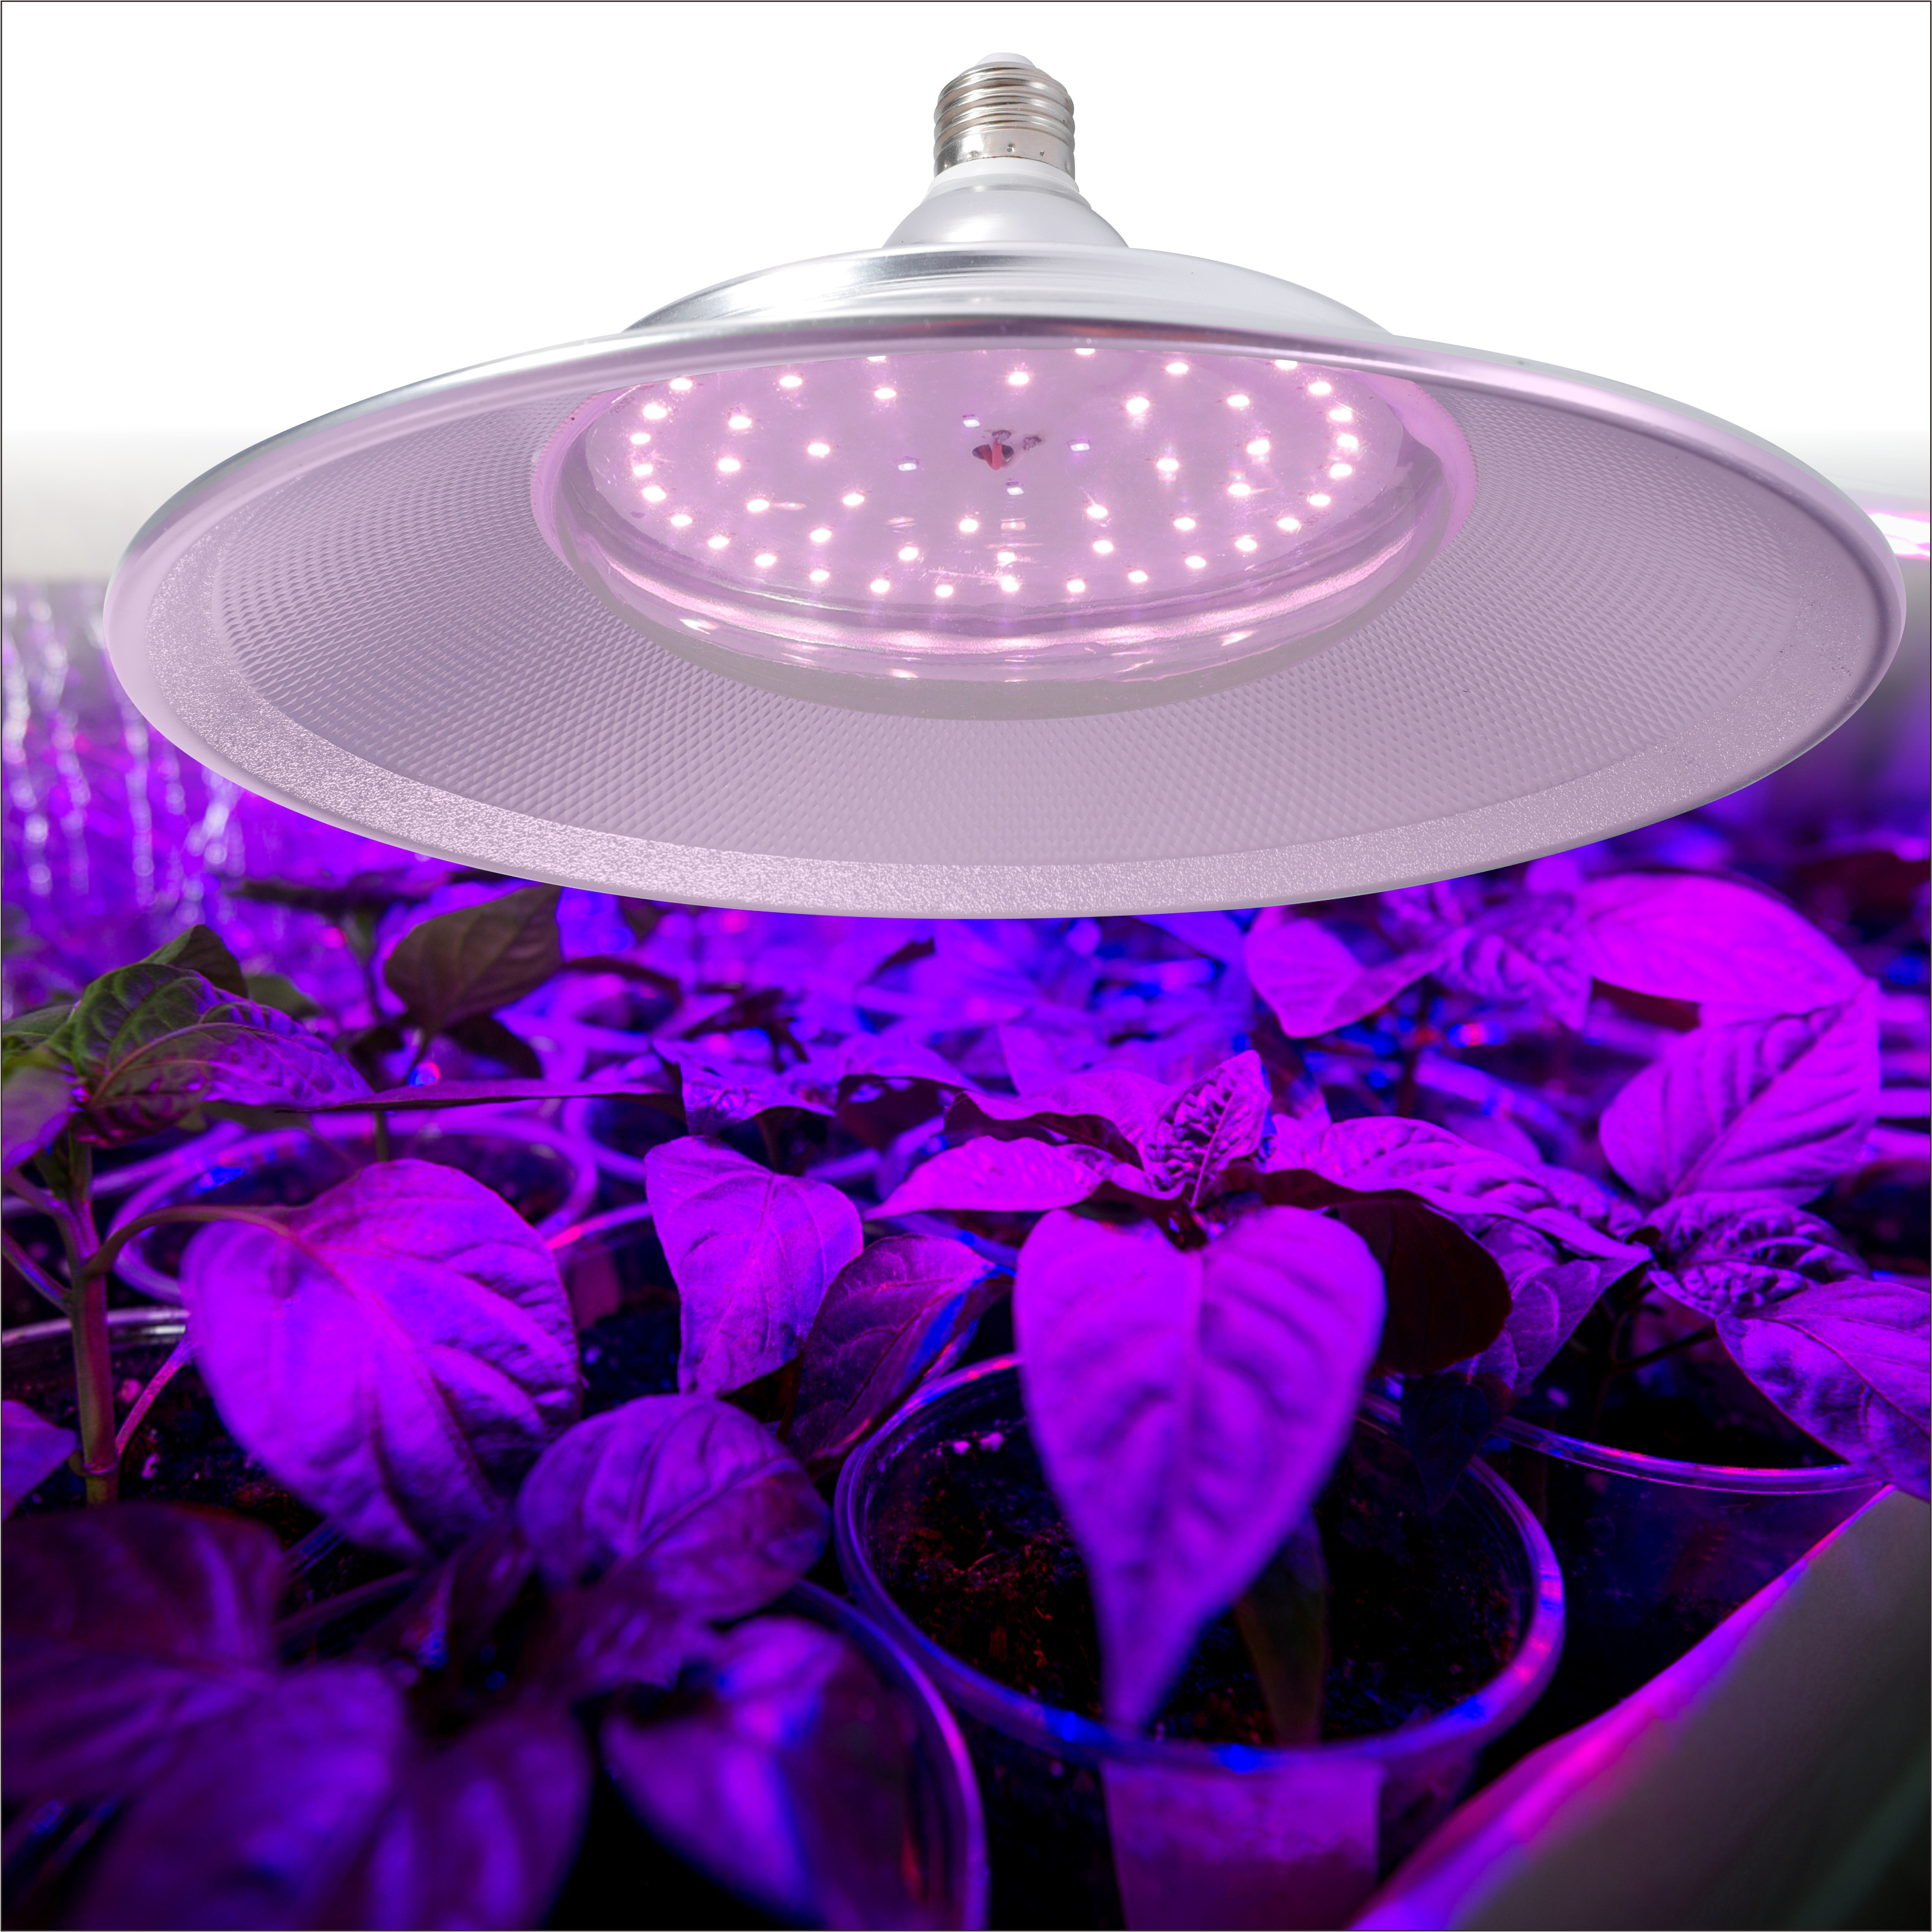 Led plant grow light 18W with New Diodes & IR Lights Full Spectrum Veg Bloom Growing Lamps for Indoor Plants Seeding Flower Led Plant Light Fixture